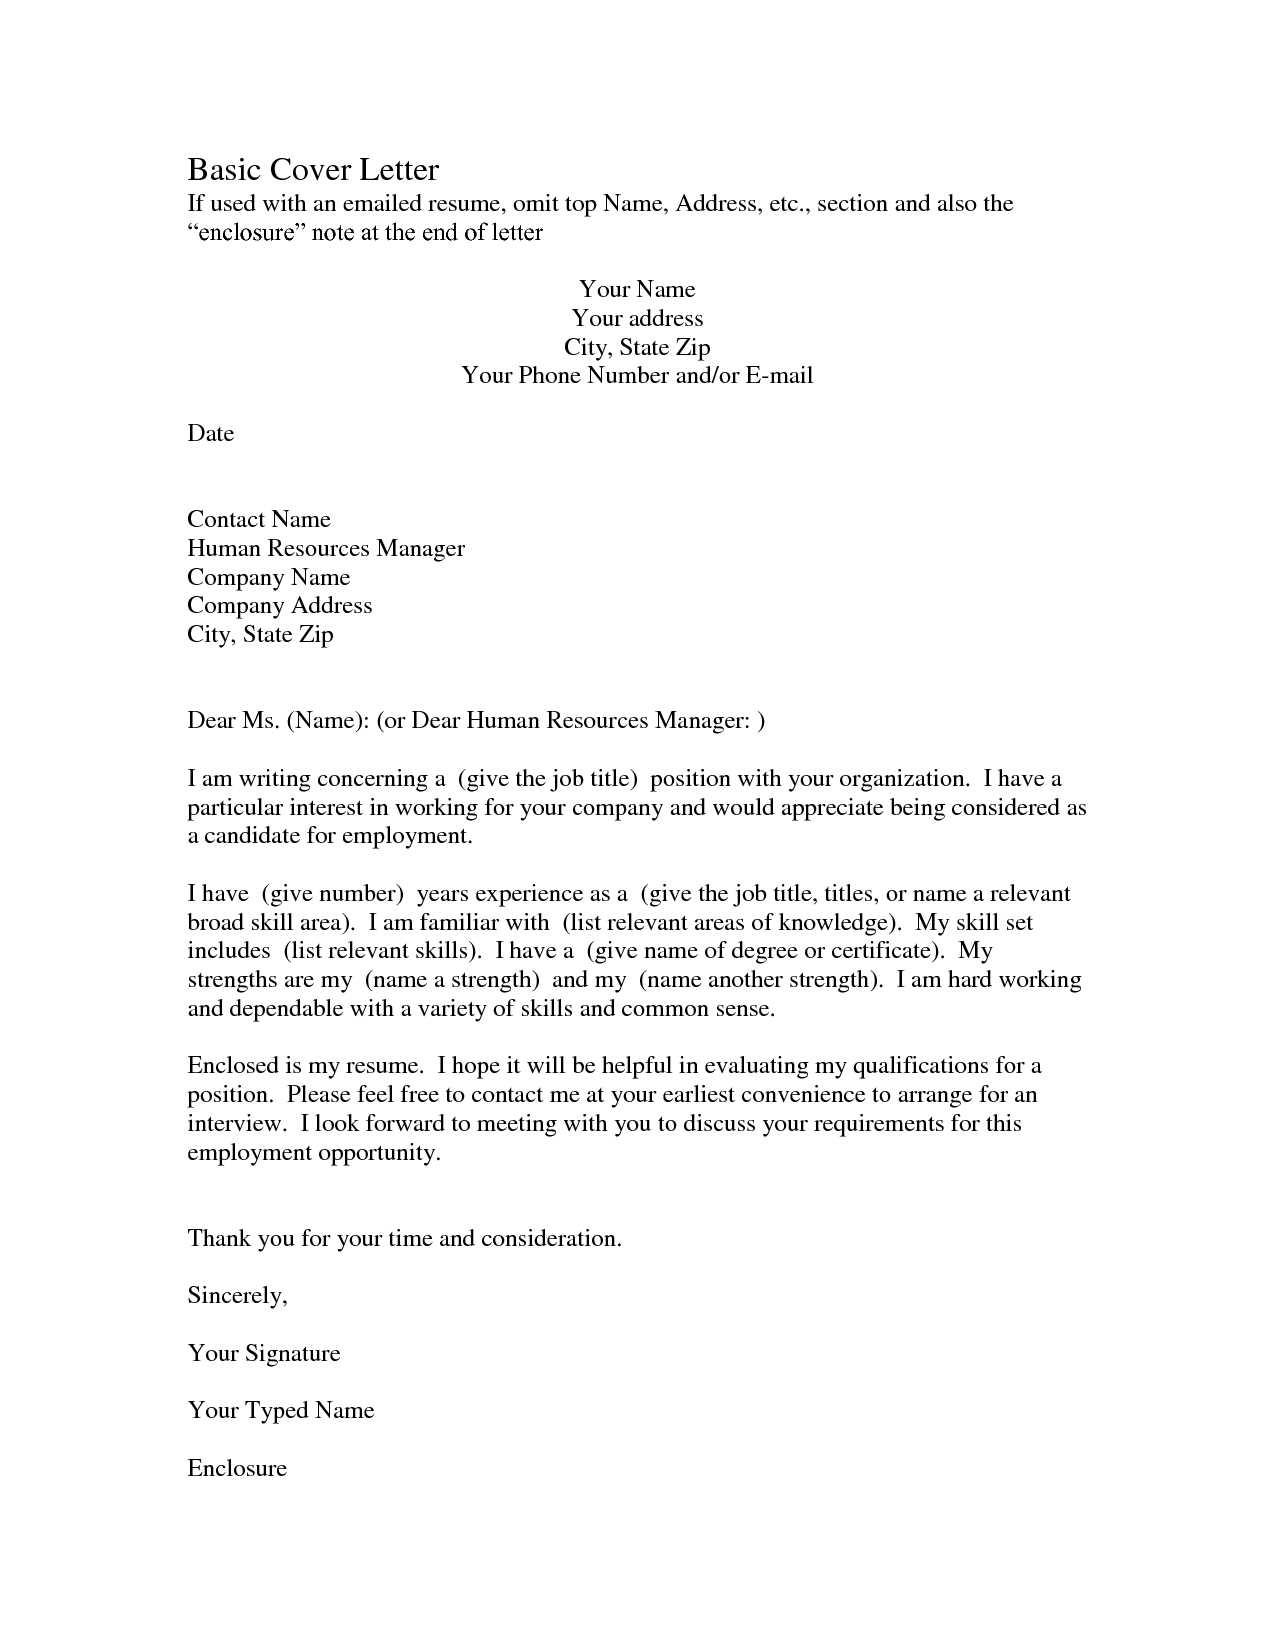 Employee Relocation Letter Template Examples Letter